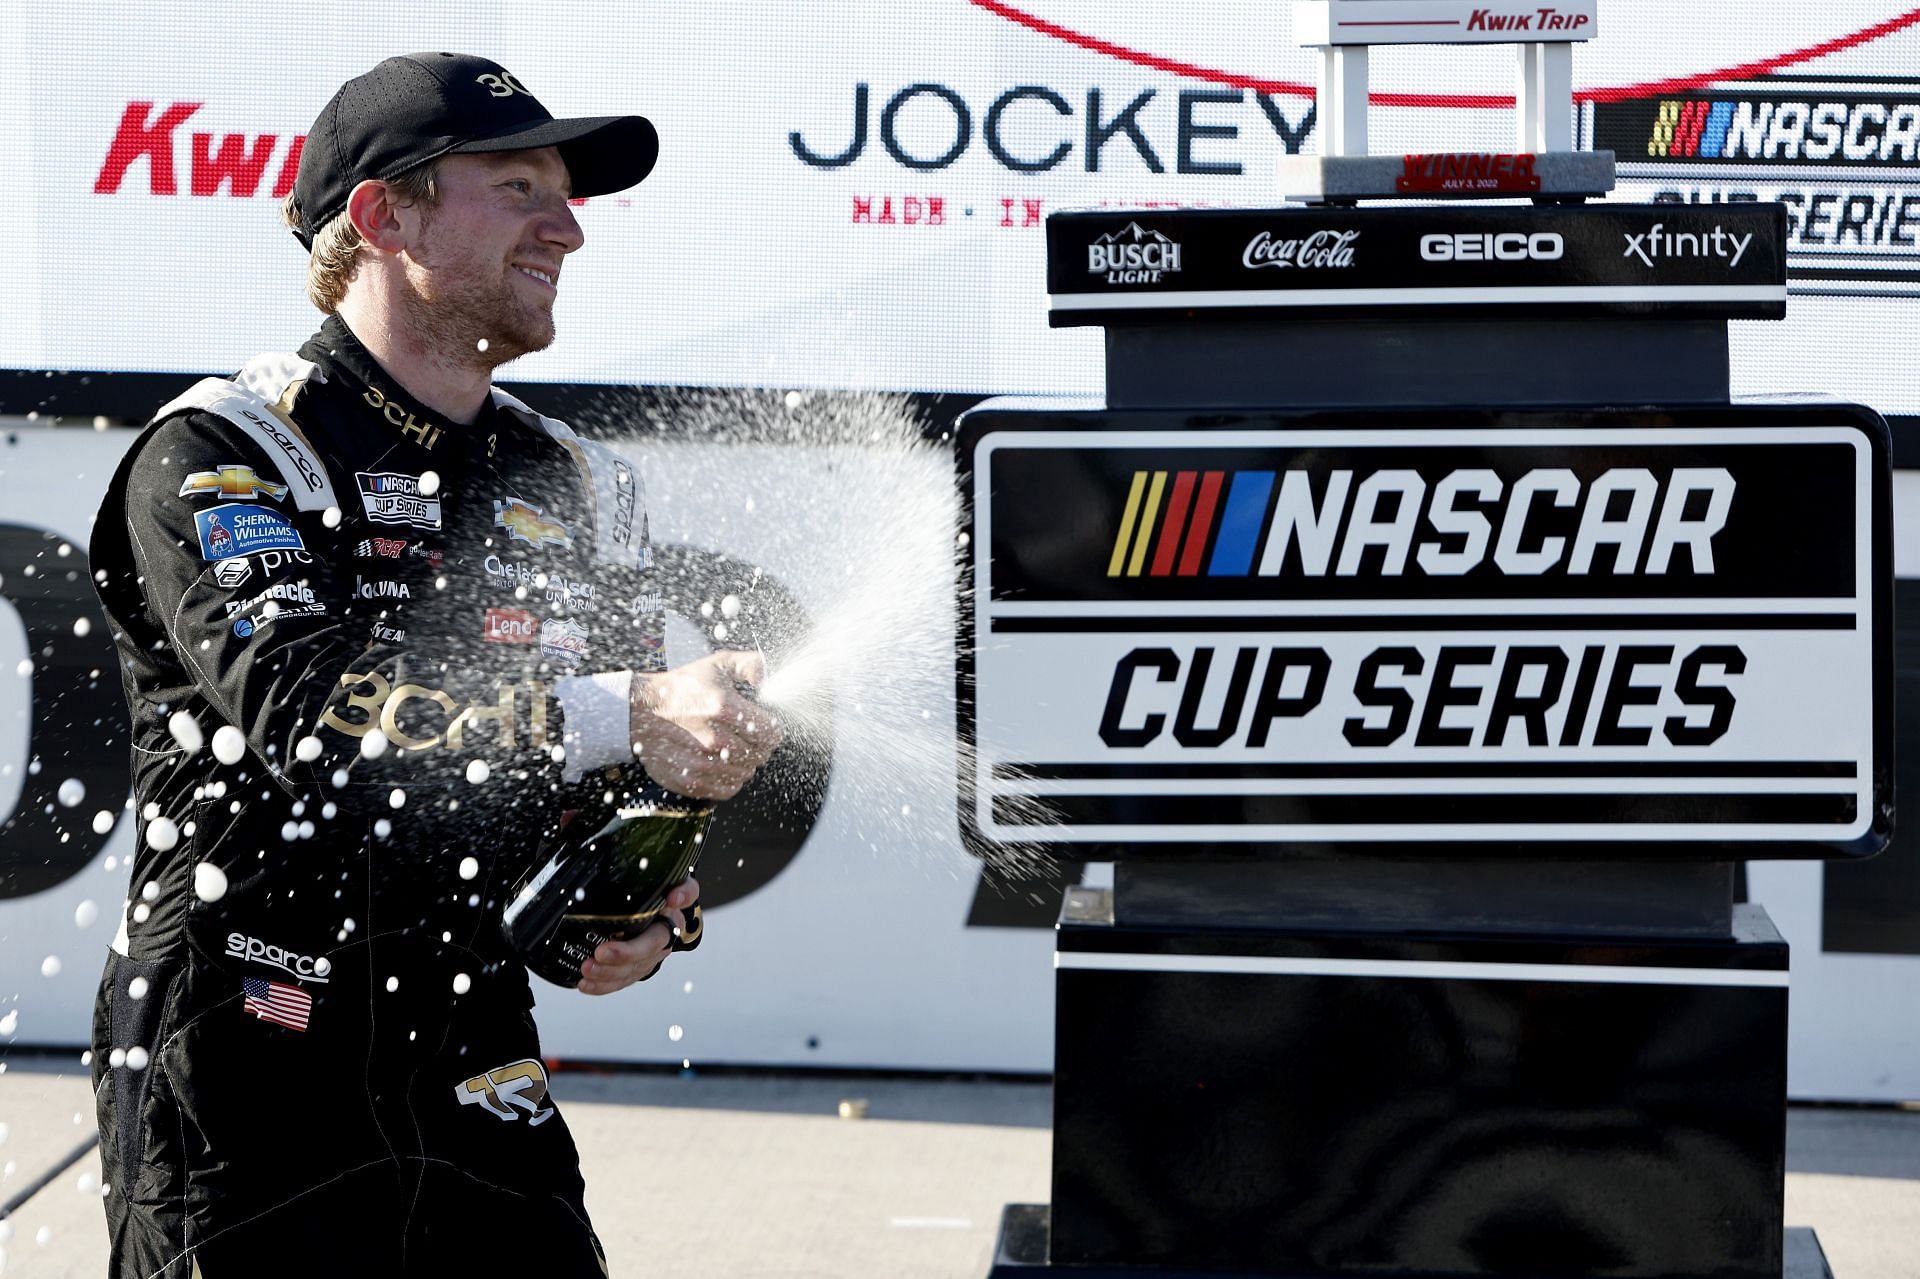 Tyler Reddick celebrate by spraying champagne in victory lane after winning the NASCAR Cup Series Kwik Trip 250 at Road America (Photo by Sean Gardner/Getty Images)